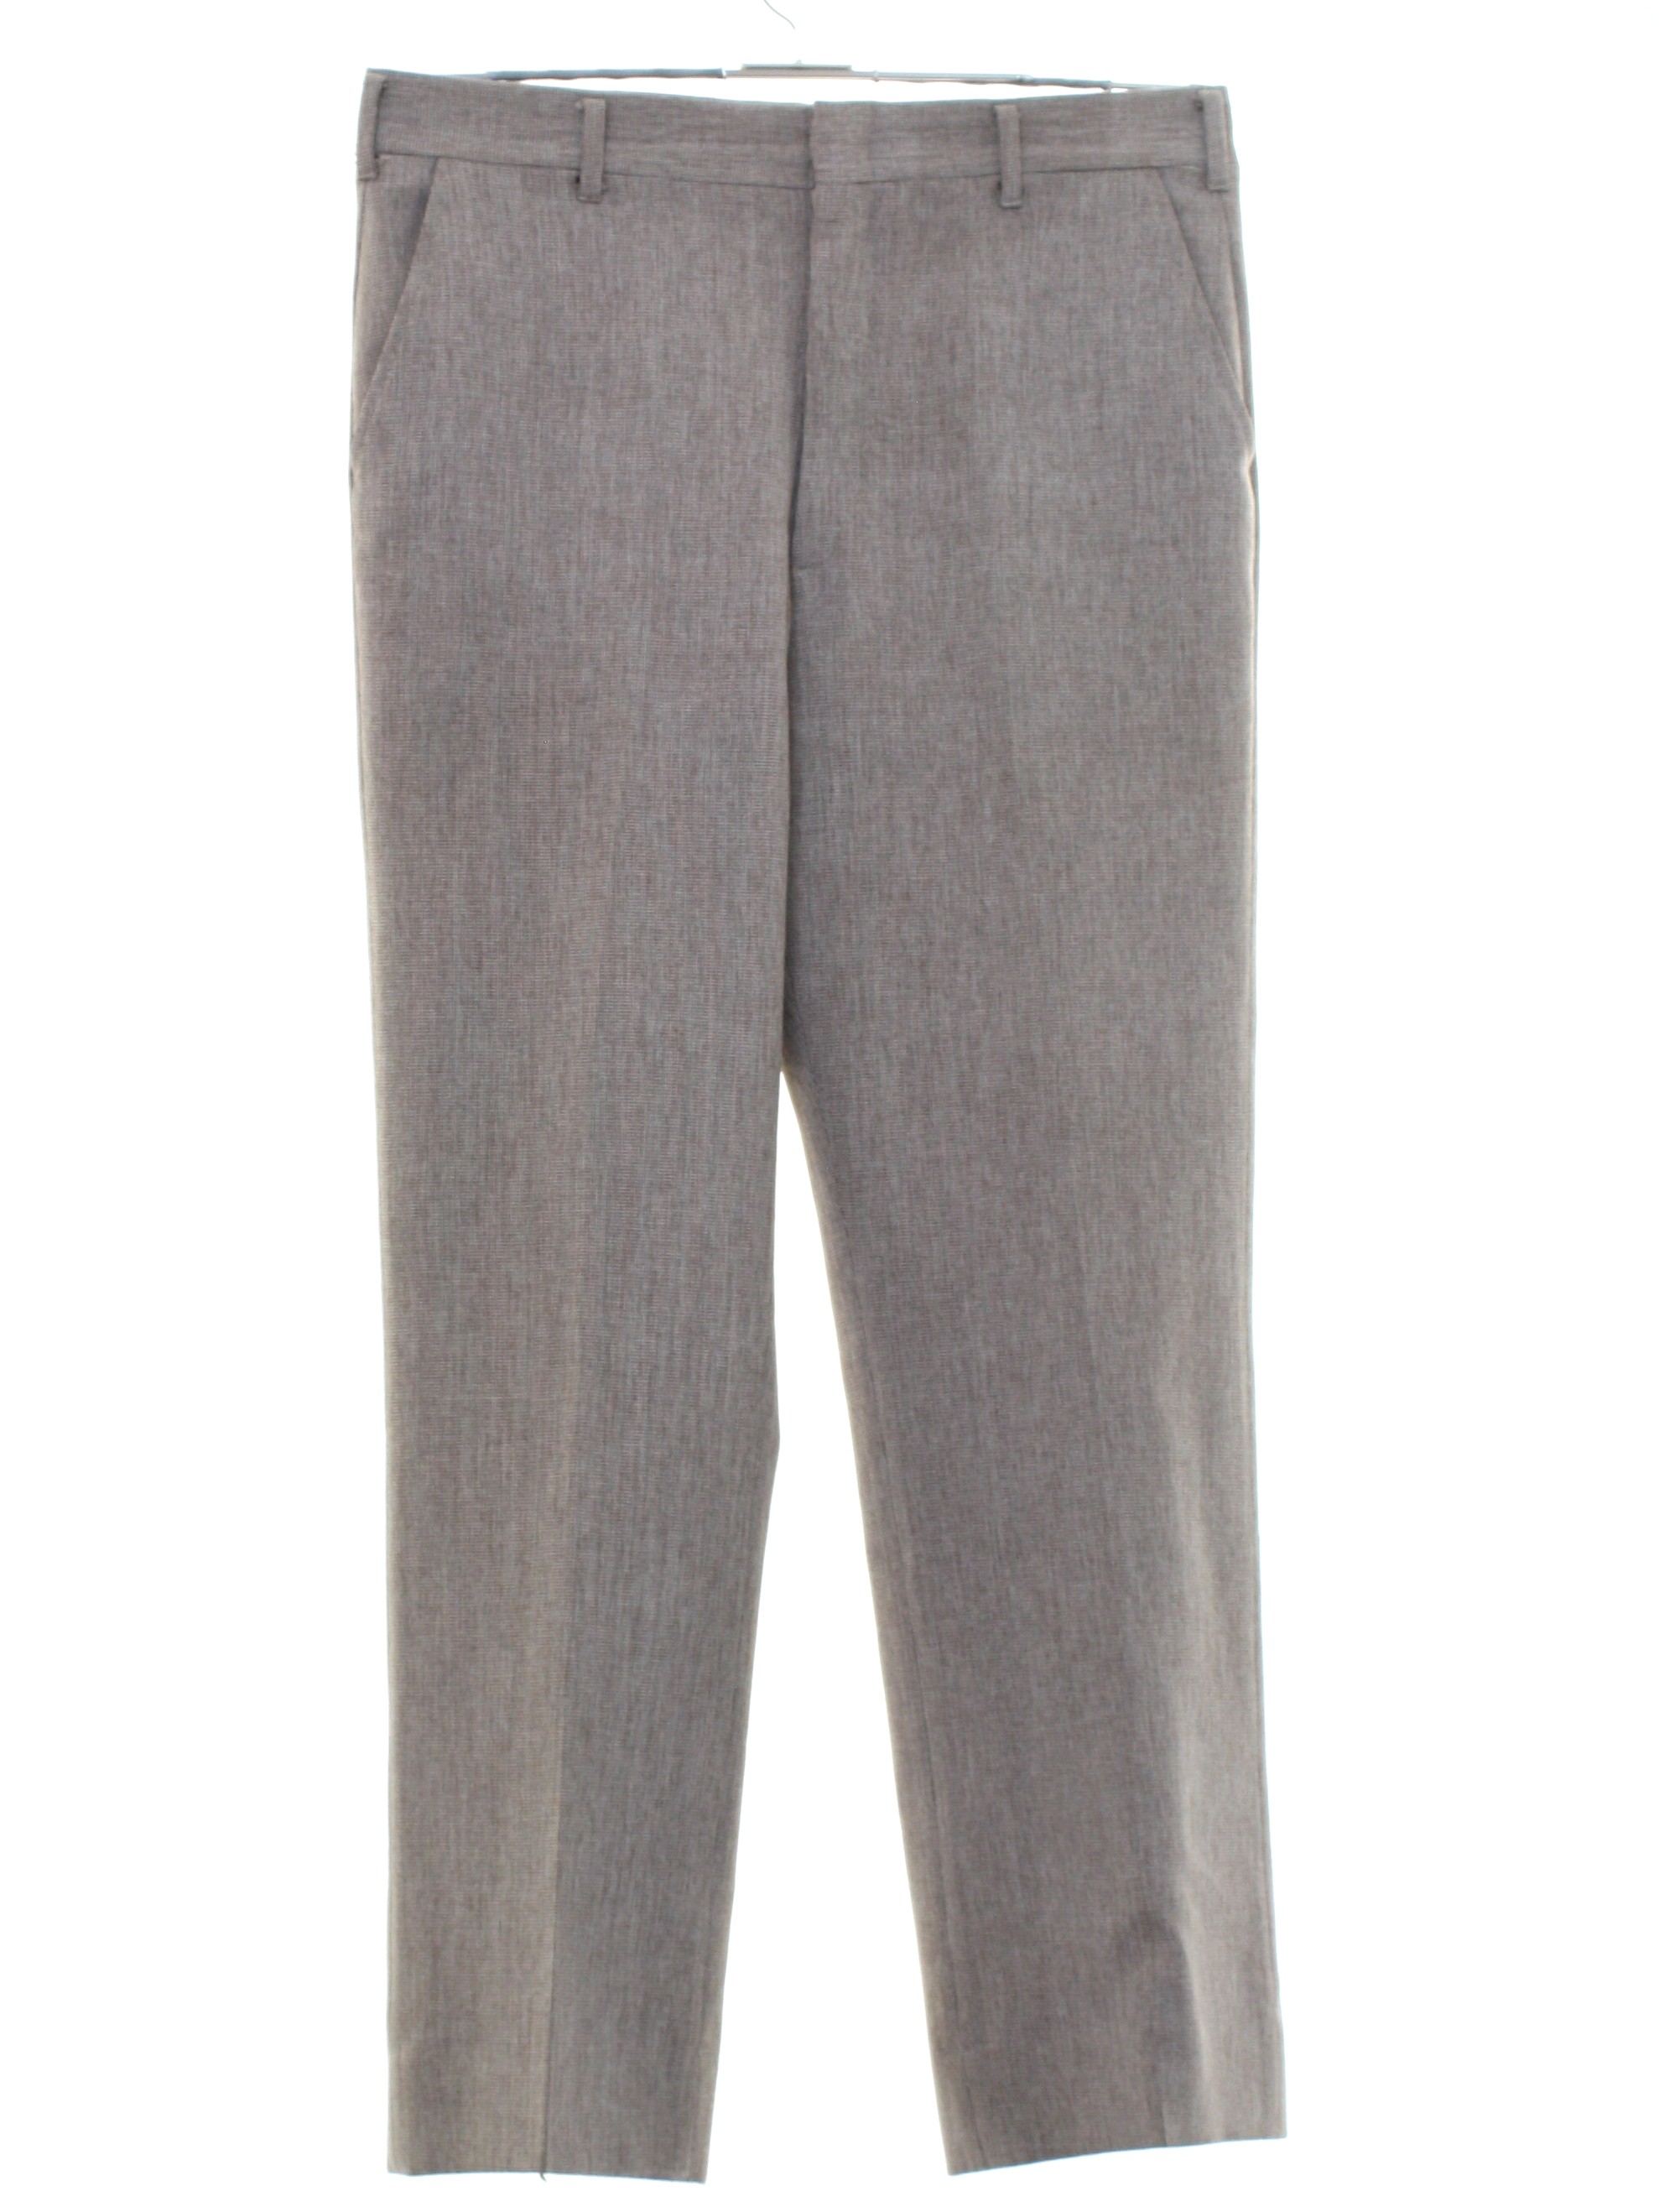 1980's Retro Pants: Early 80s -No Label- Mens sand gray solid colored ...